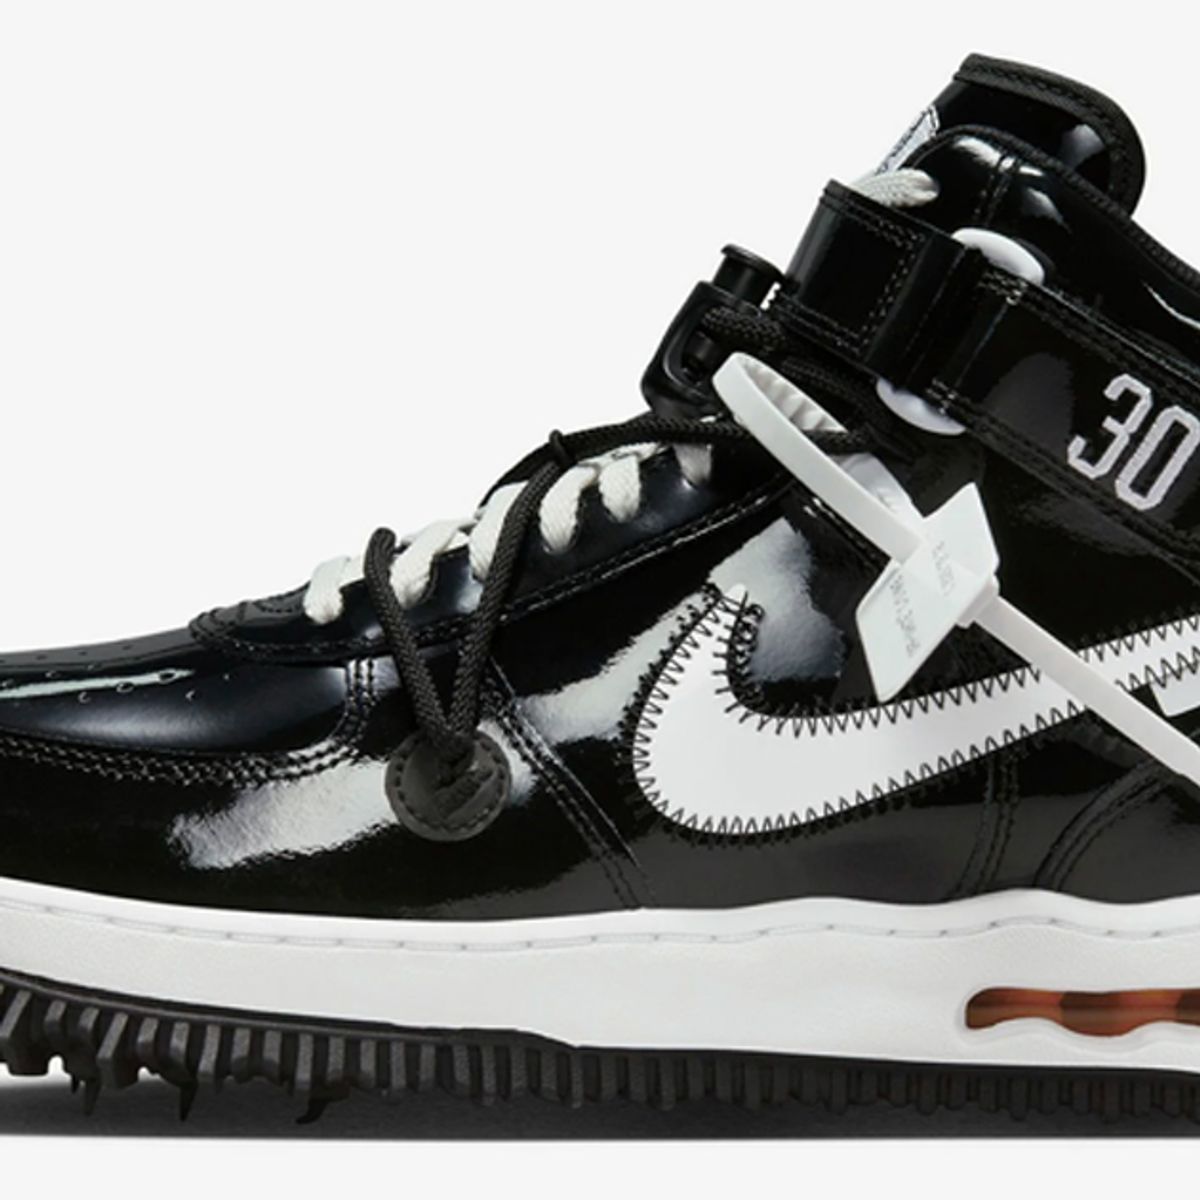 Nike Air Force 1 Utility Mid Strap First Look